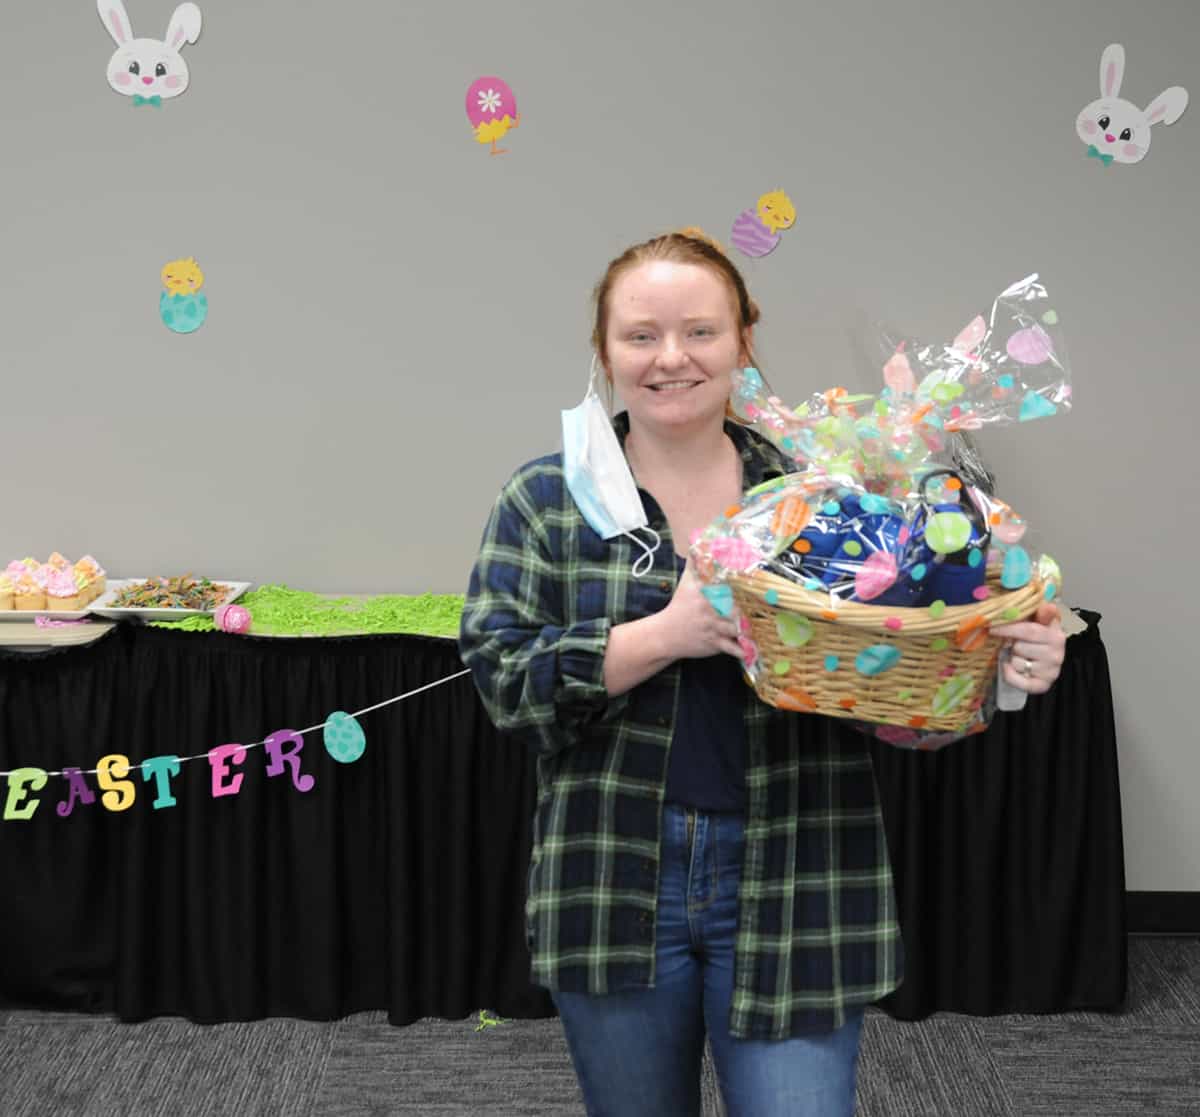 Jasmine Alexander is shown with her prize for finding the winner egg at the SGTC Crisp County Center Easter Egg Hunt student activity.